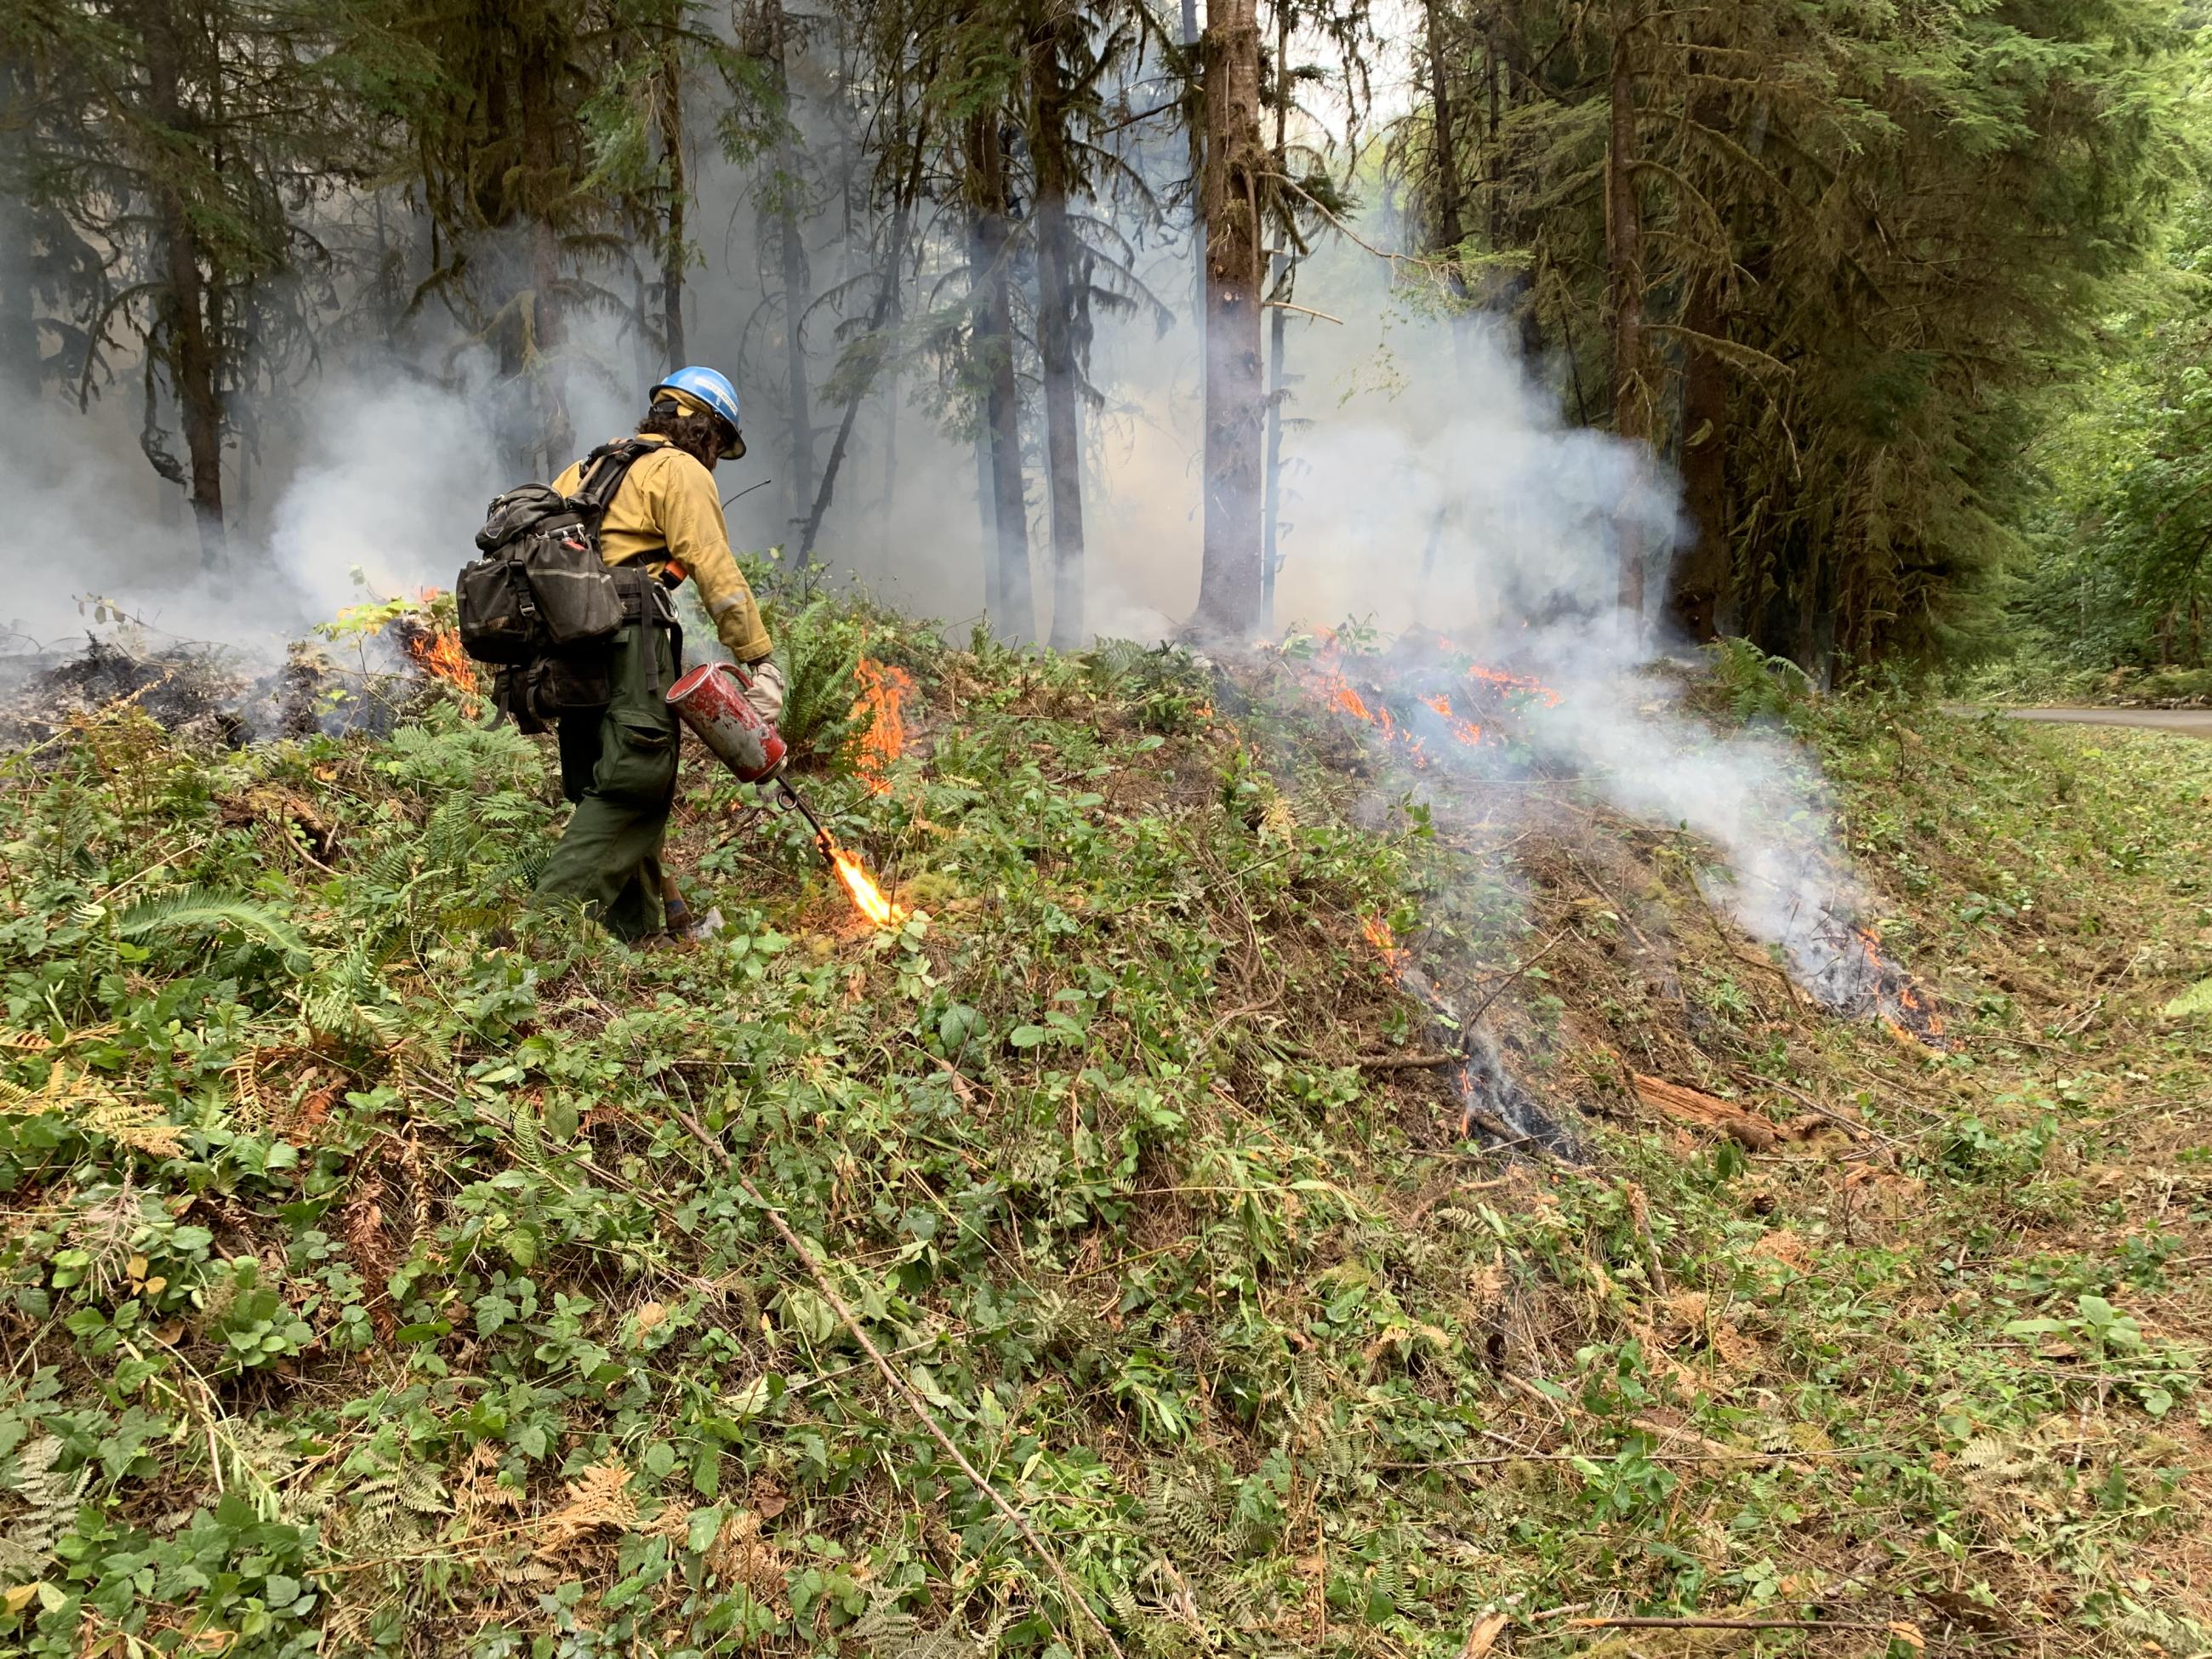 A firefighter walks along green vegetation carrying a canister that drips small flames.